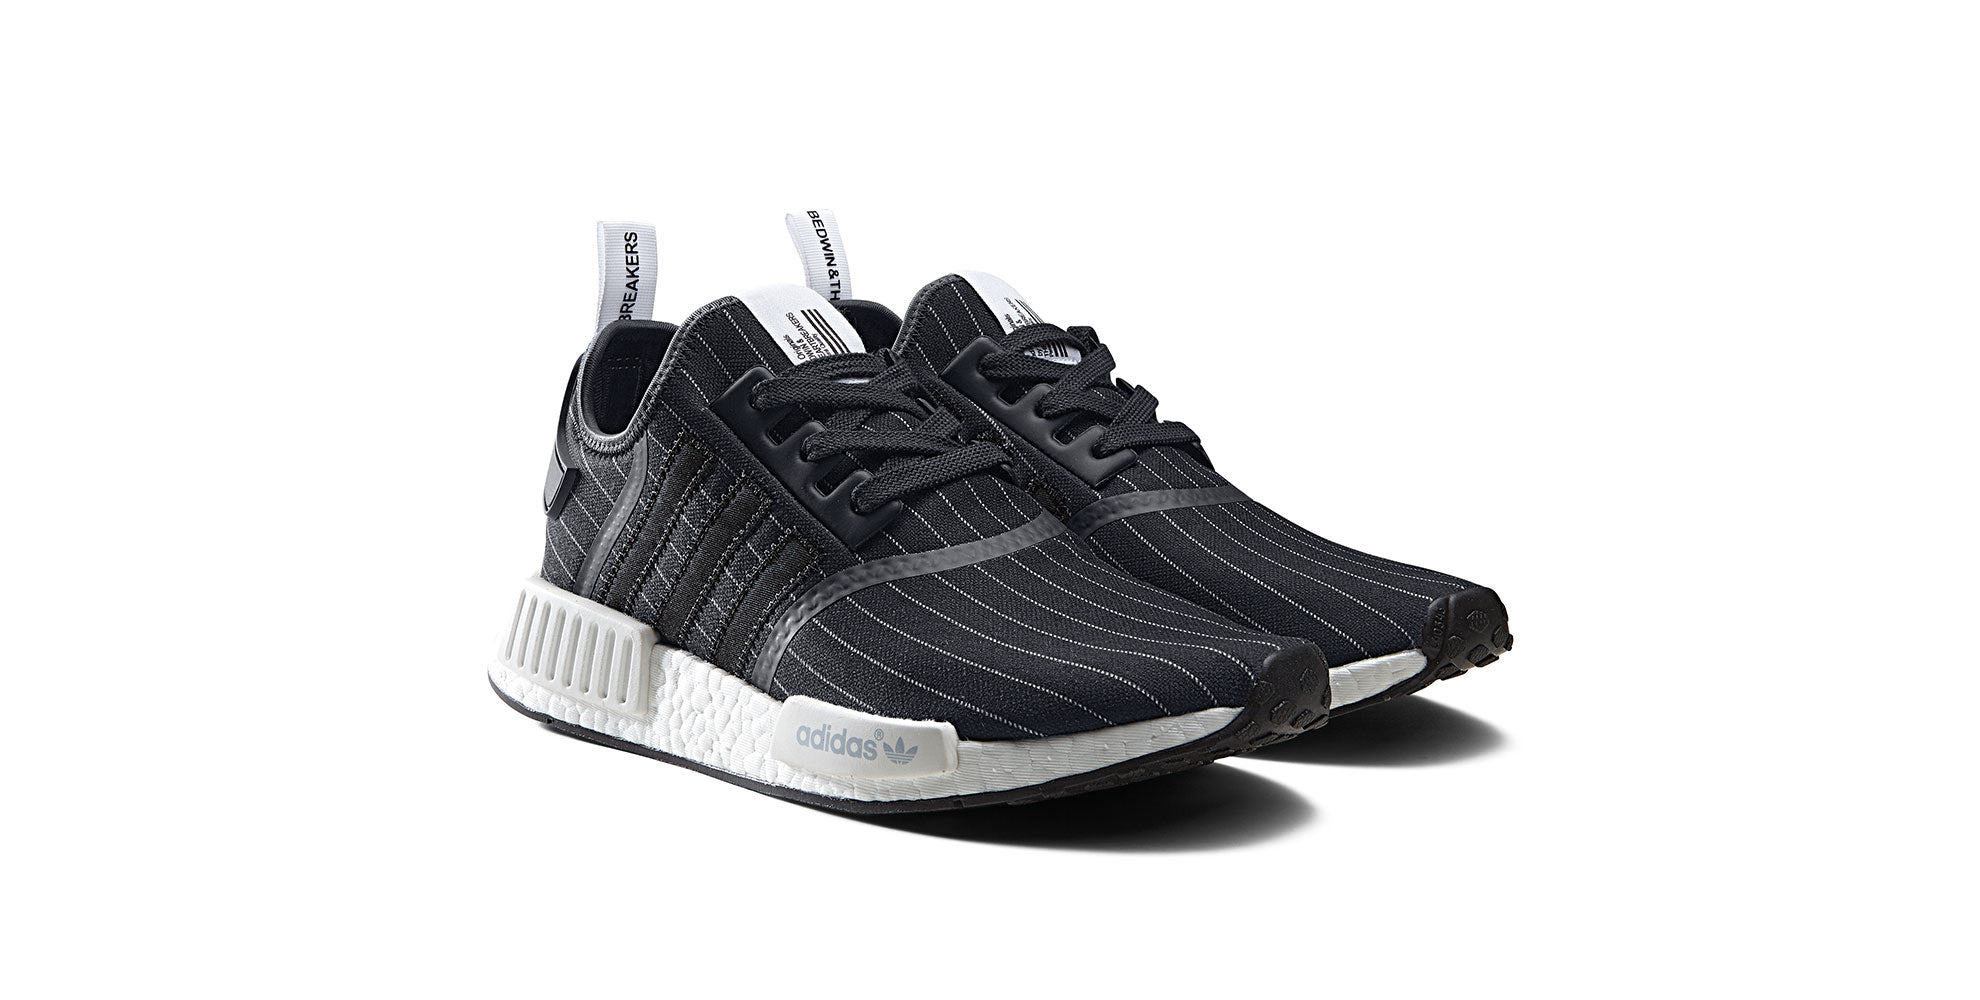 BEDWIN THE x adidas NMD R1 CROSSOVER